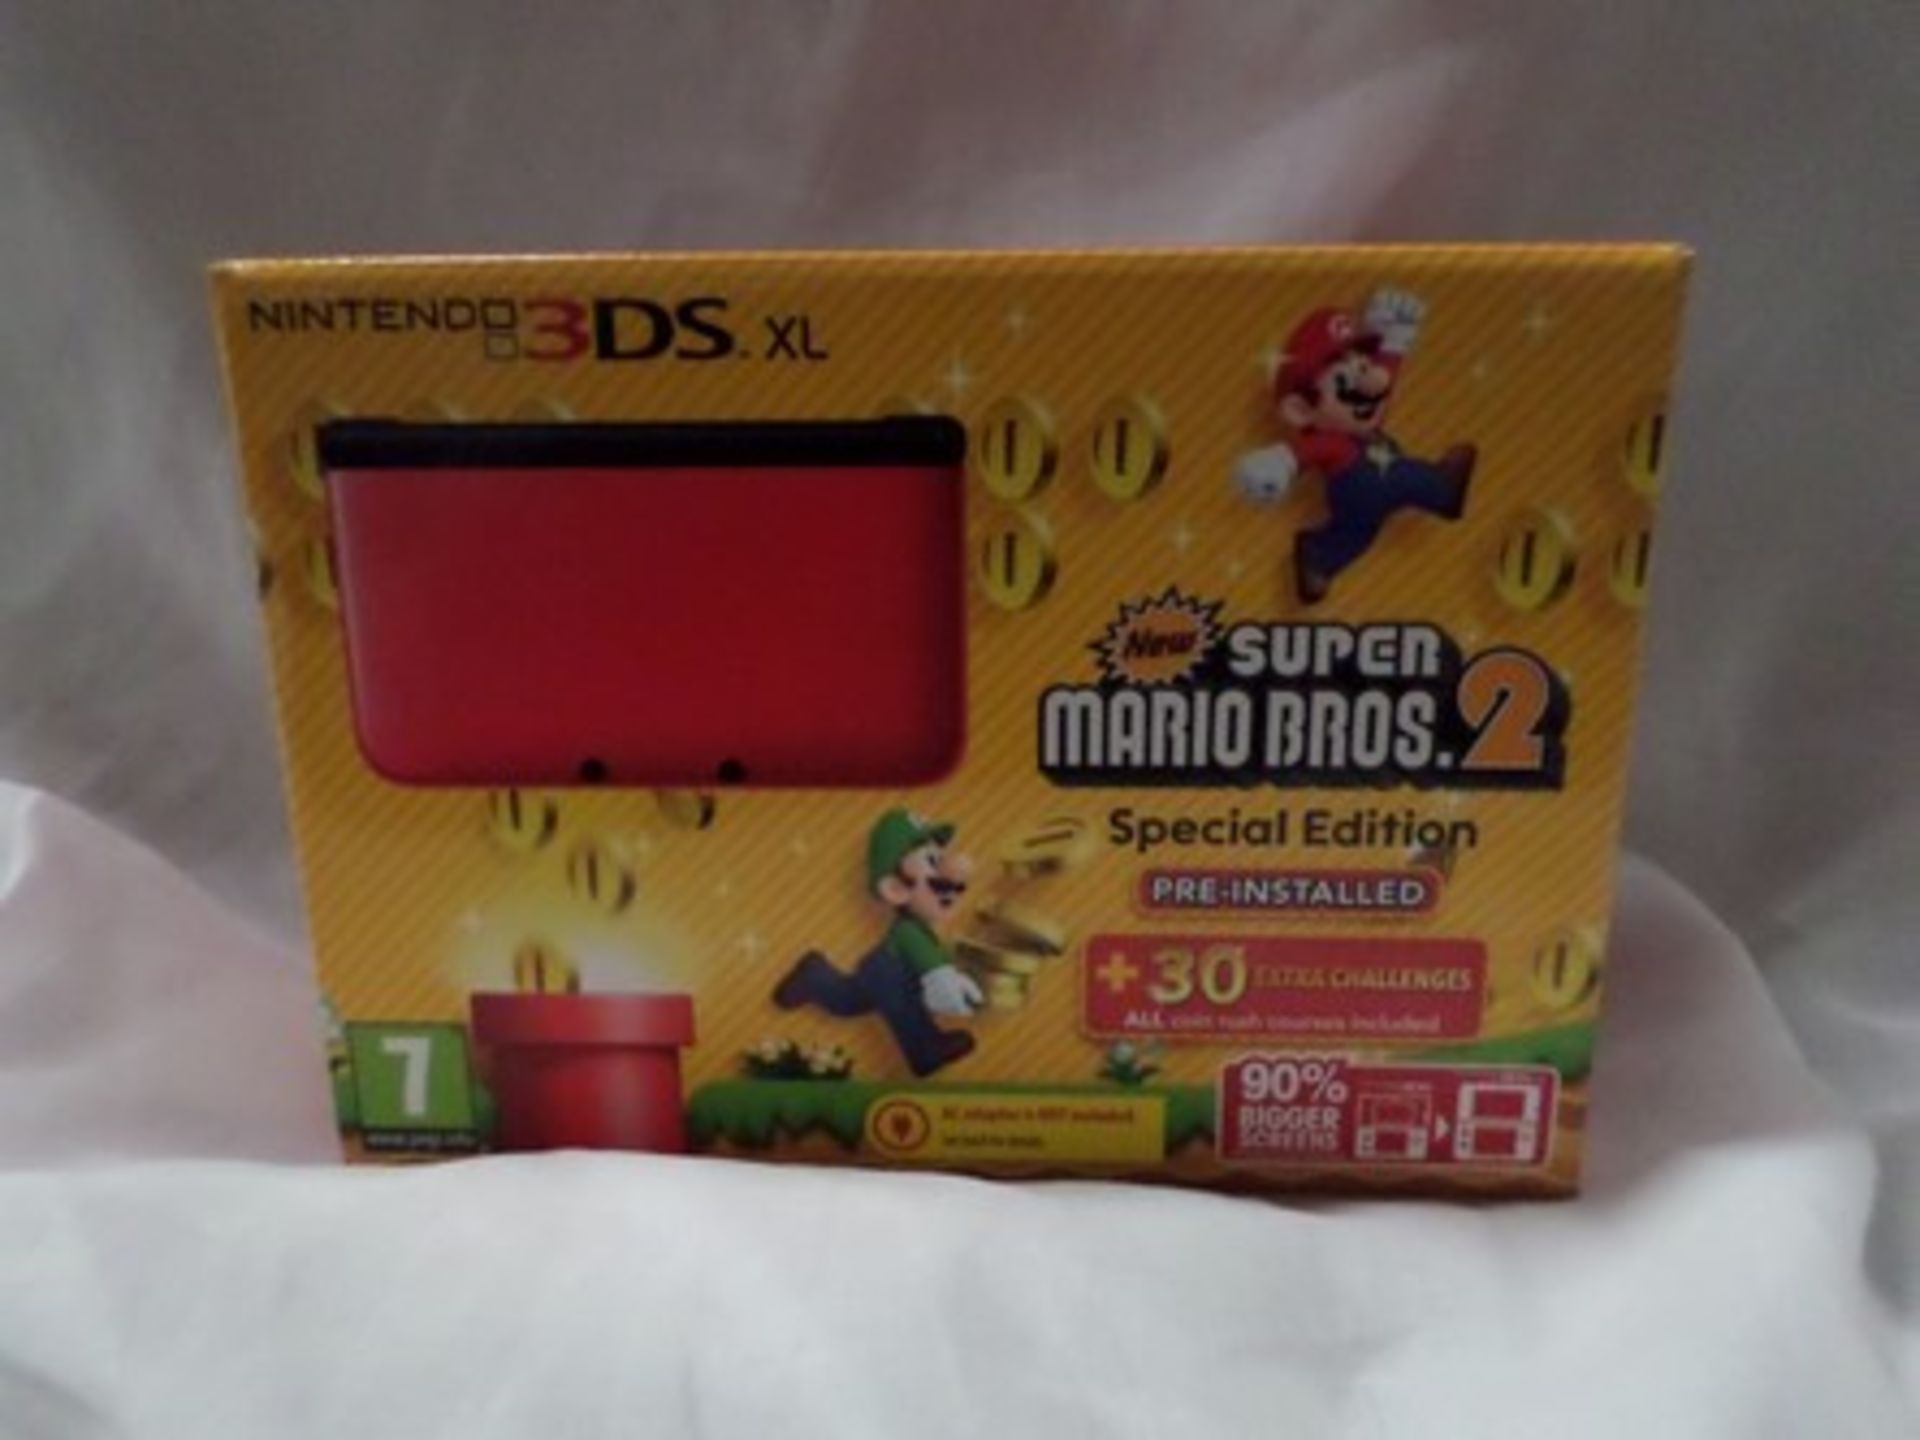 1 x Nintendo 3DS - Super Mario Bros 2 special edition pre-installed, colour red and black. -sealed